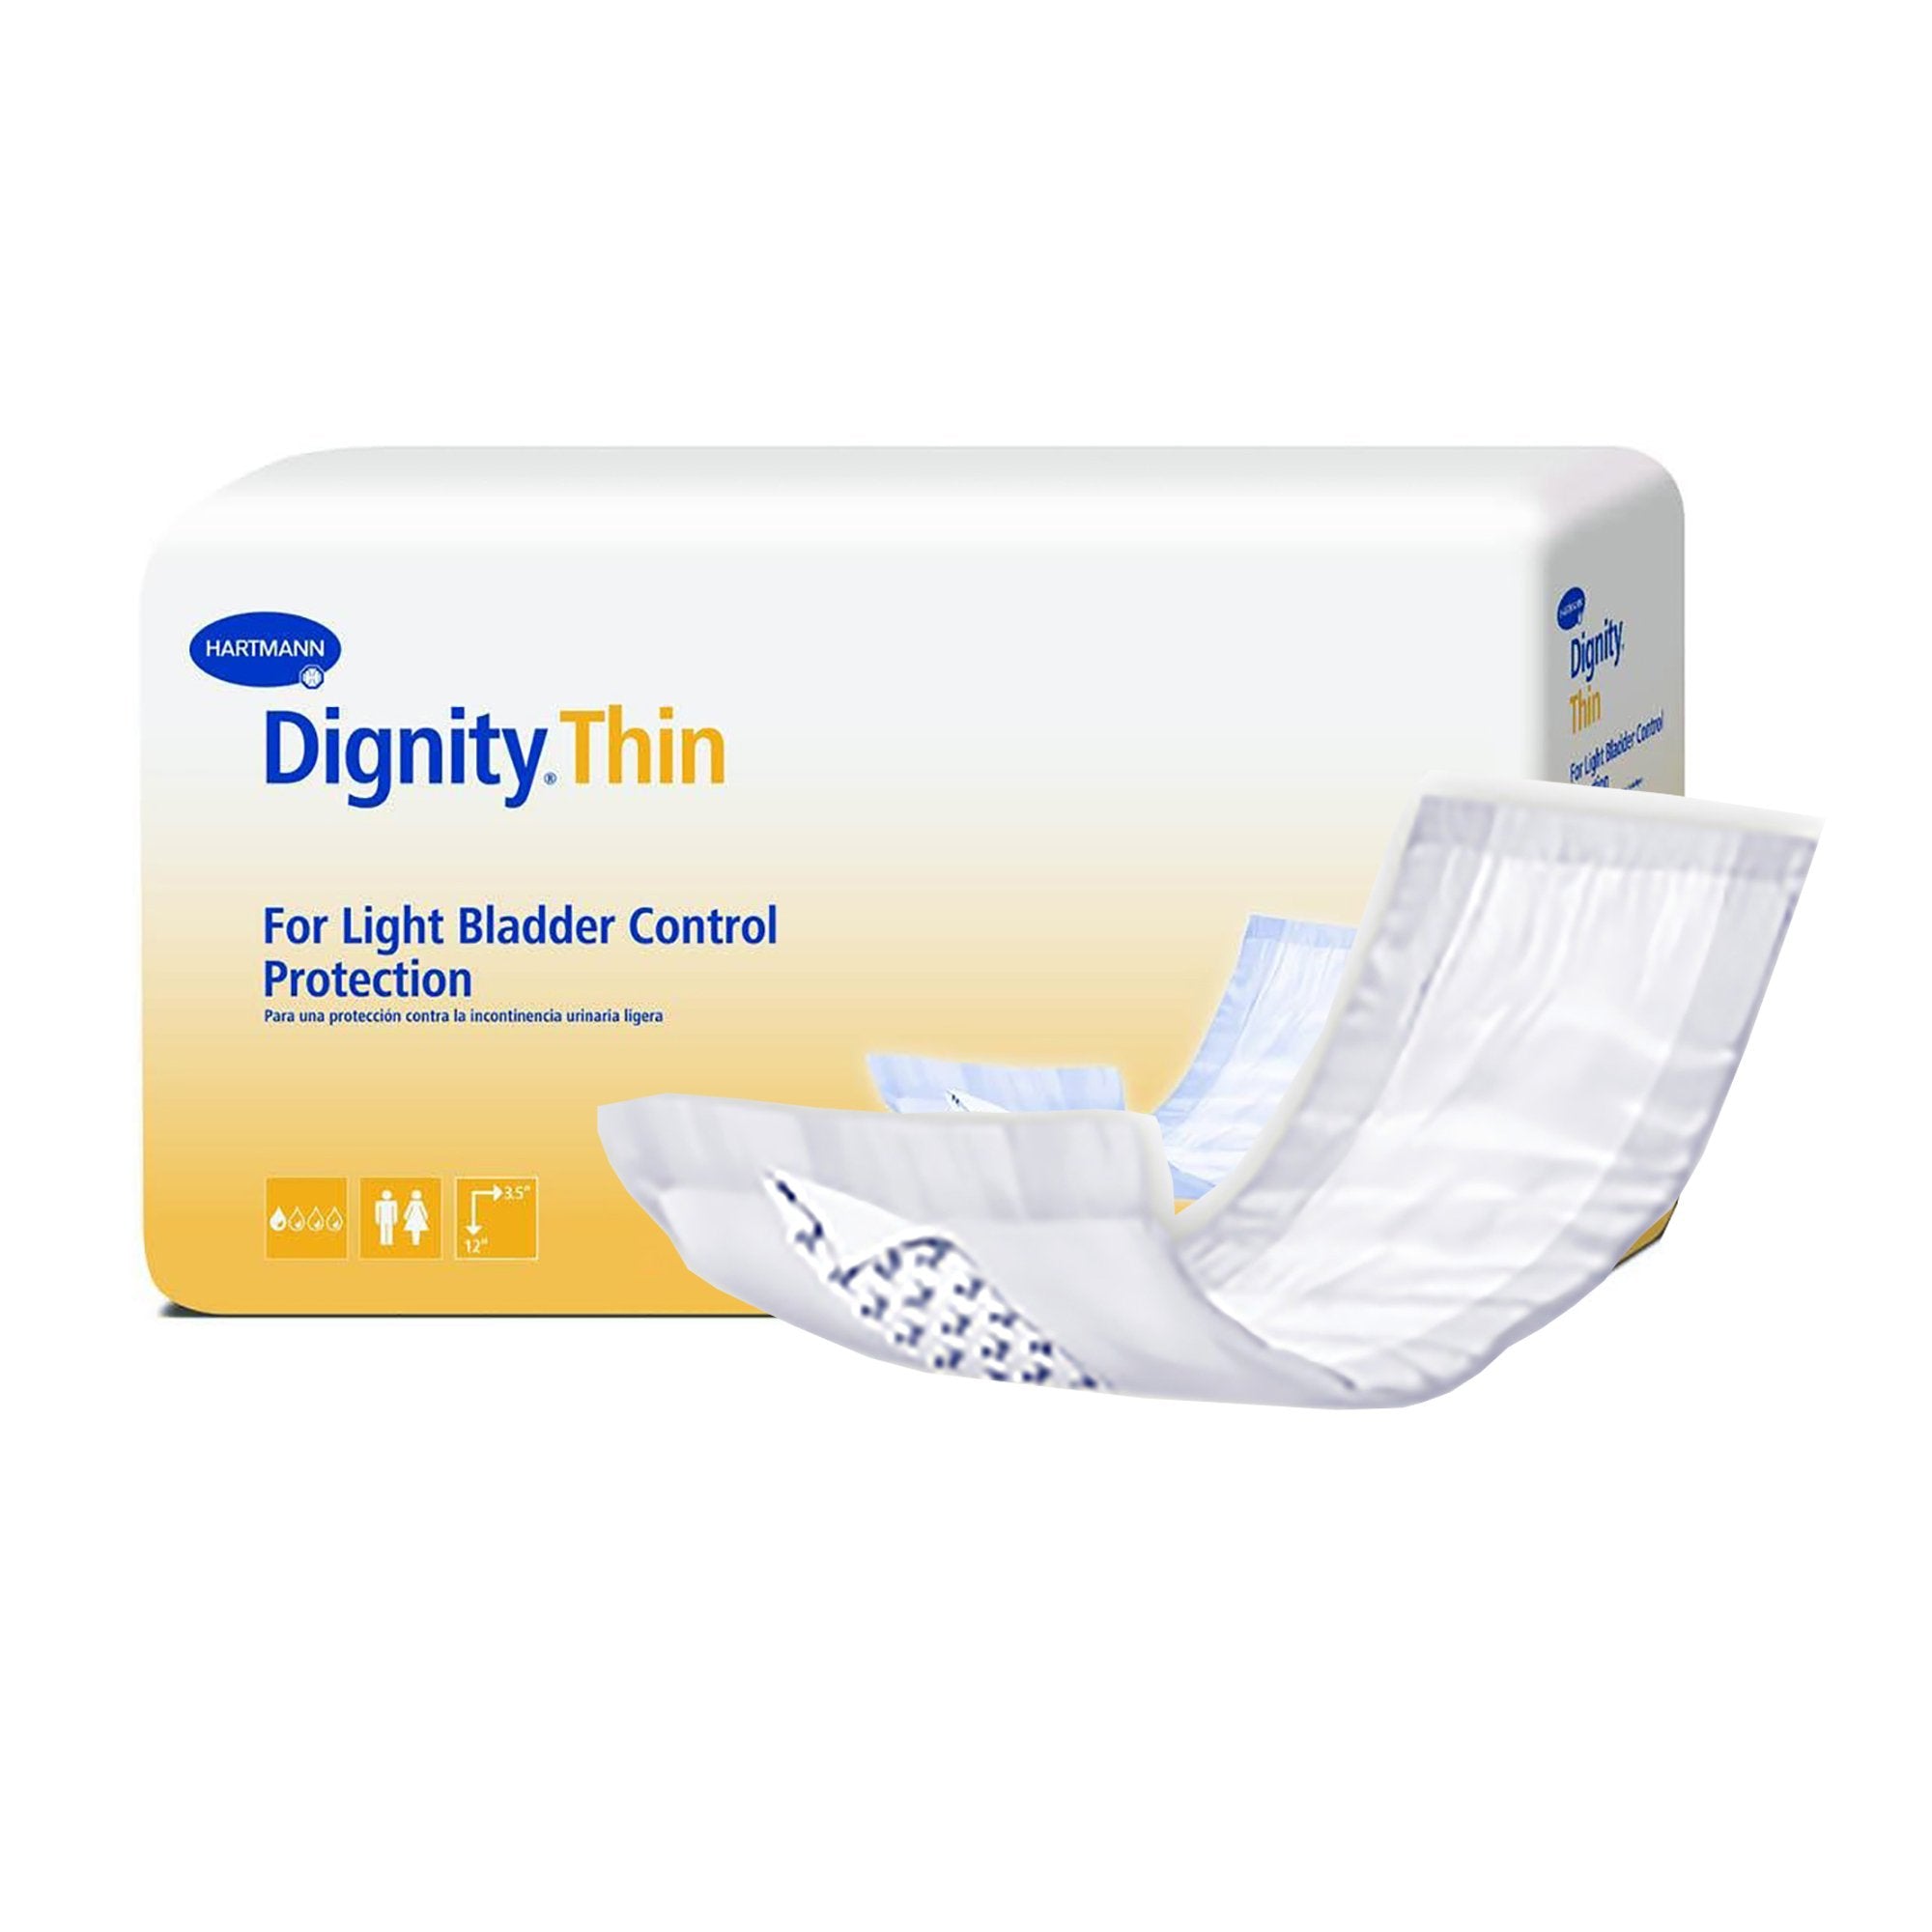 Bladder Control Pad Dignity® Thin 3-1/2 X 12 Inch Light Absorbency Polymer Core One Size Fits Most